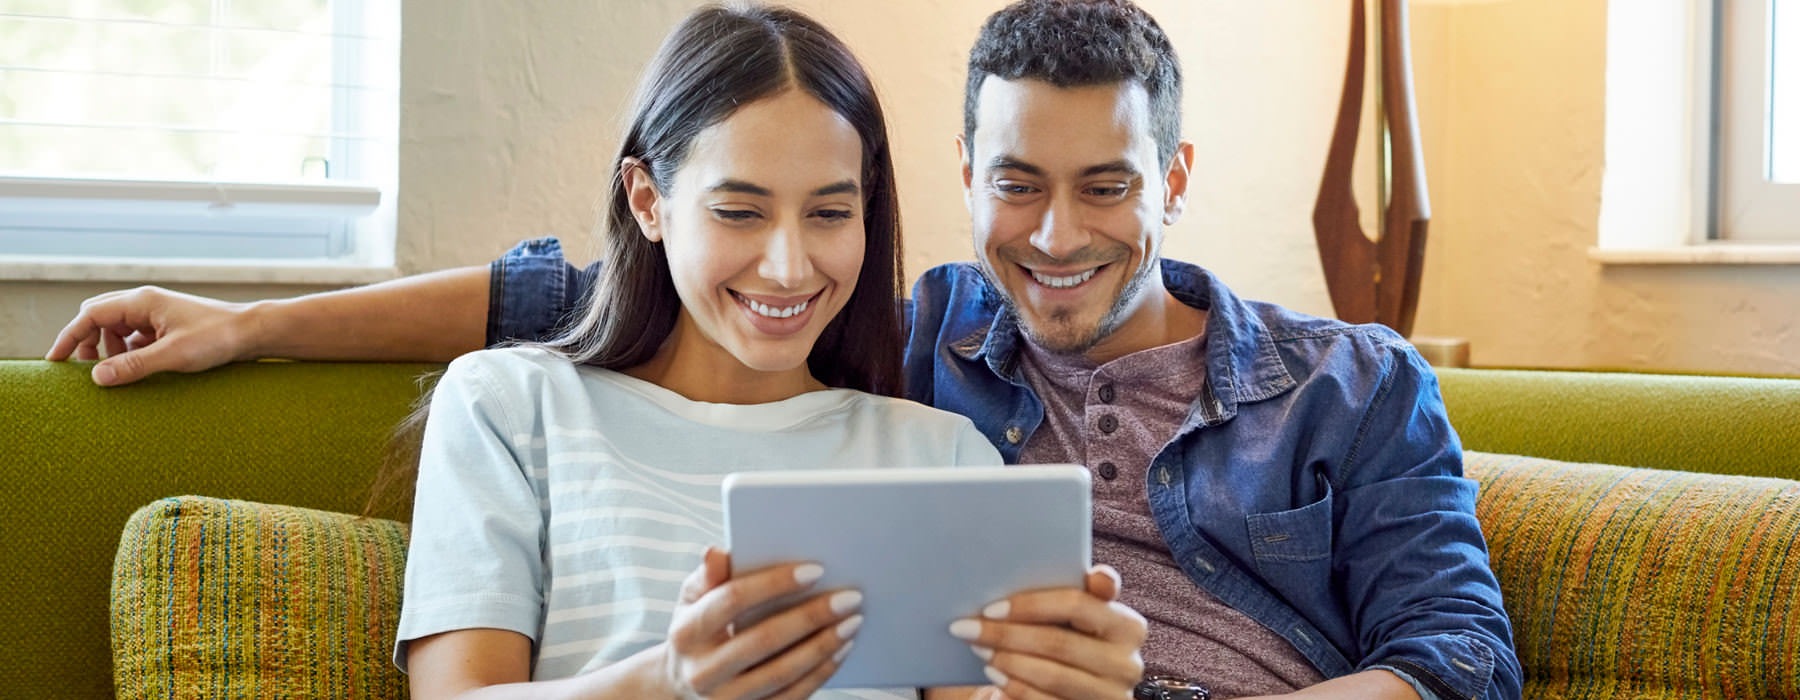 young couple looks at iPad while relaxing on their couch